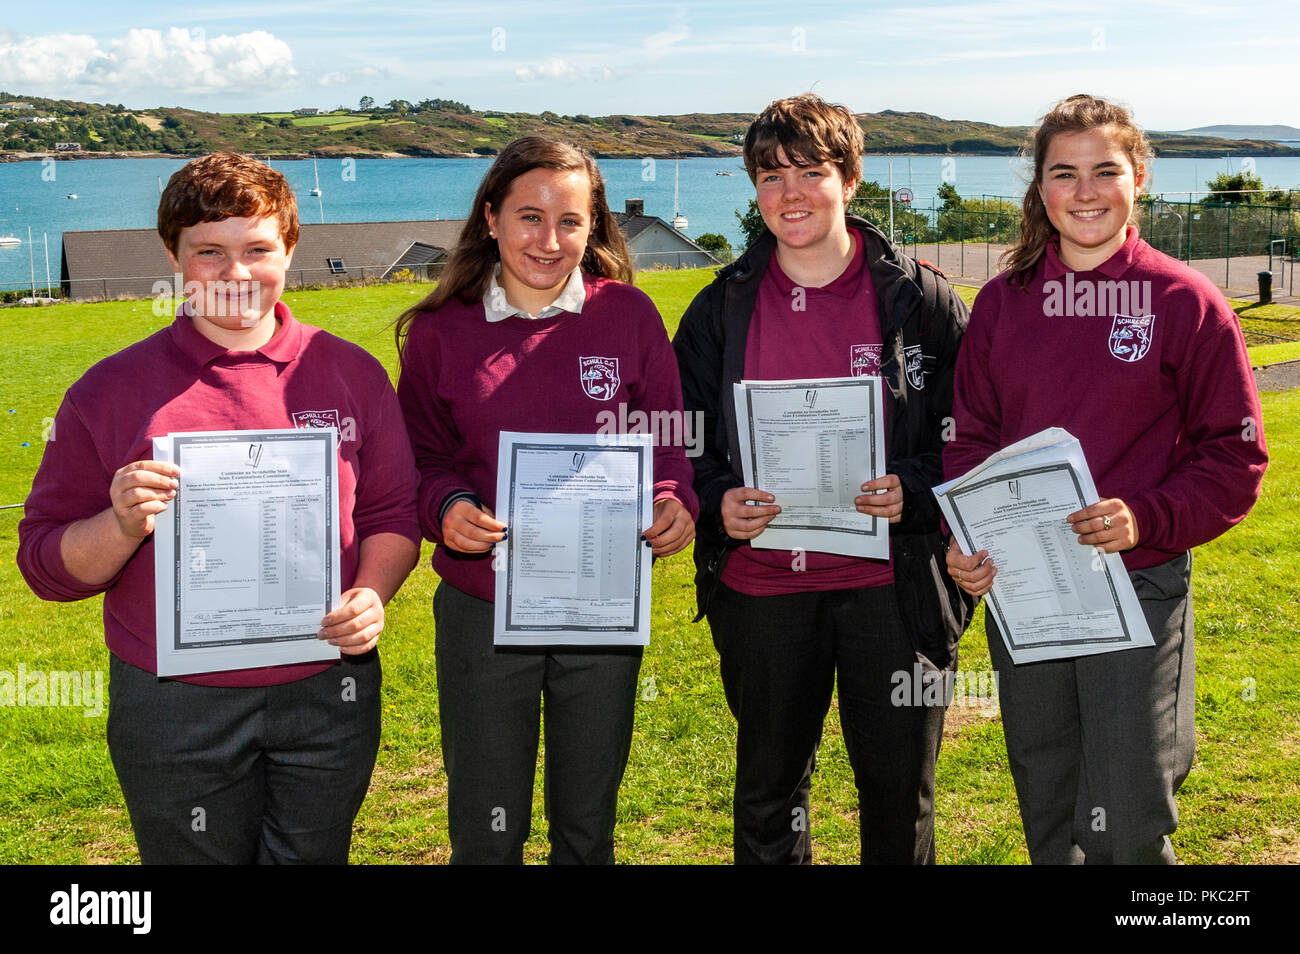 Schull, West Cork, Ireland. 12th Sept, 2018.  Over 62,500 students received their Junior Cert results today. Pictured with their results are Cliona Riordan, Daisy Seaward, Awinn Harrington-Wieler and Phoebe Hogan. Credit: Andy Gibson/Alamy Live News. Stock Photo